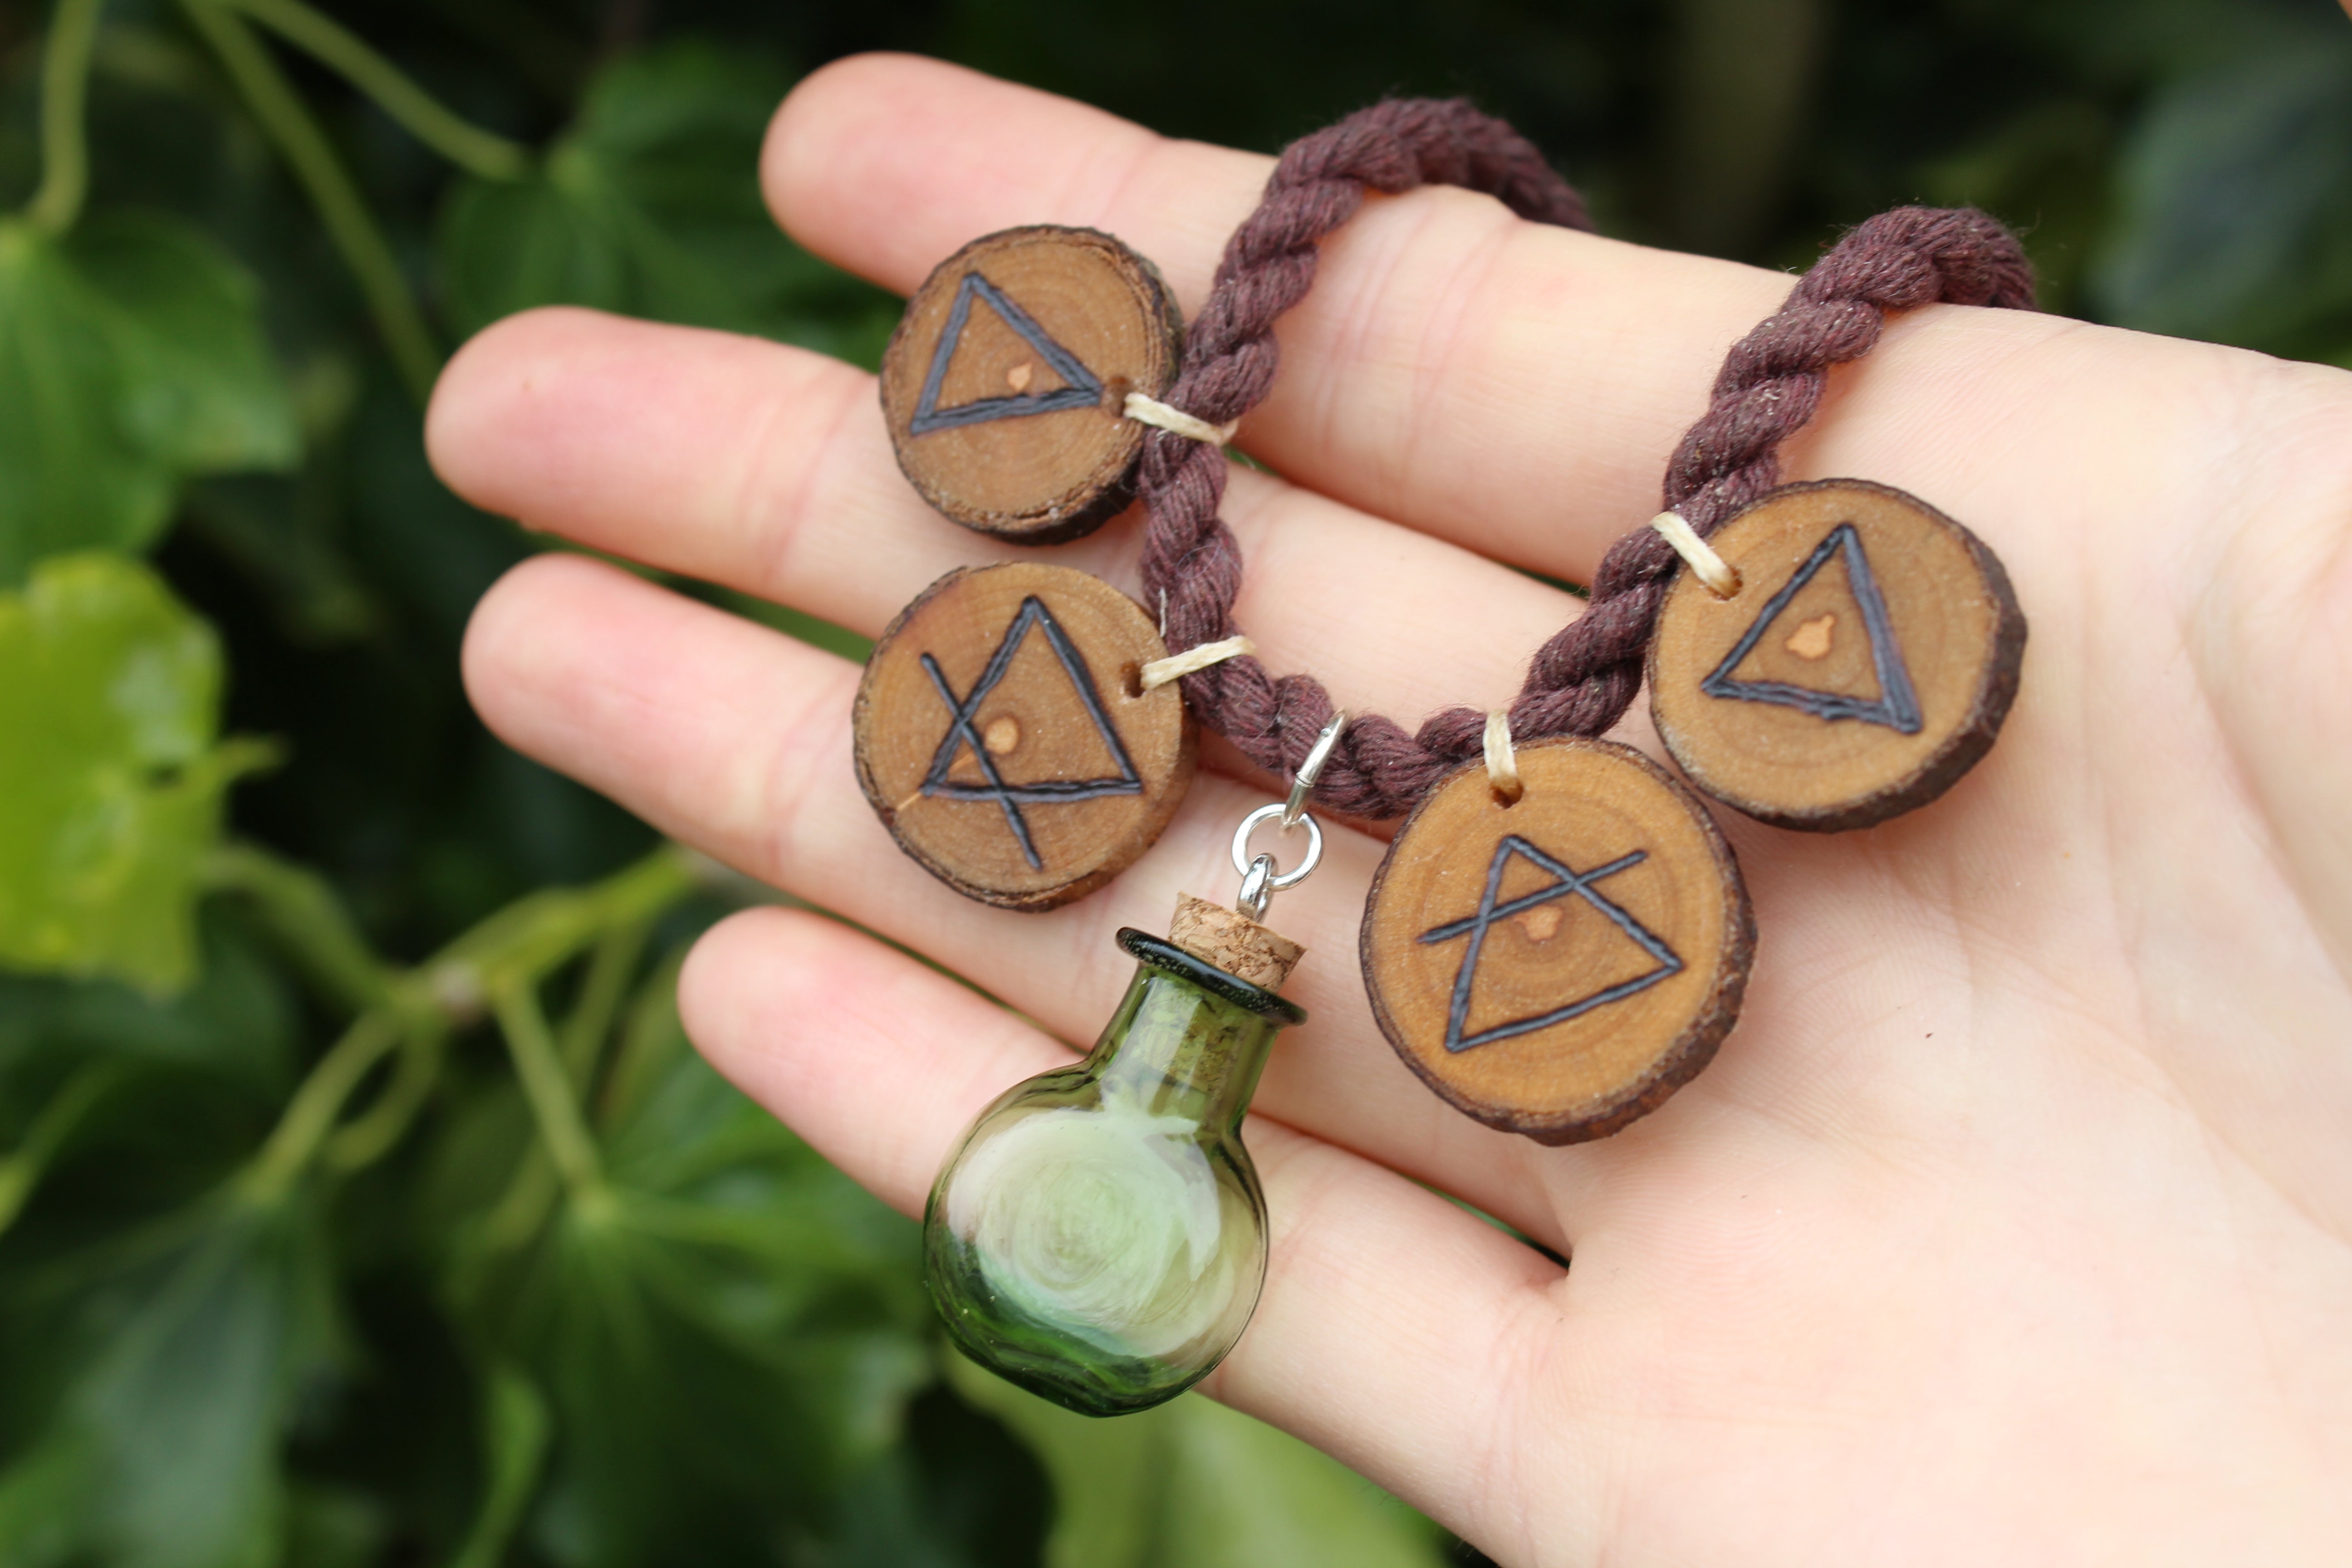 SPELL BOTTLE - ELEMENTAL MAGIC Glass Bottle Necklace with Handmade Wooden Charms.